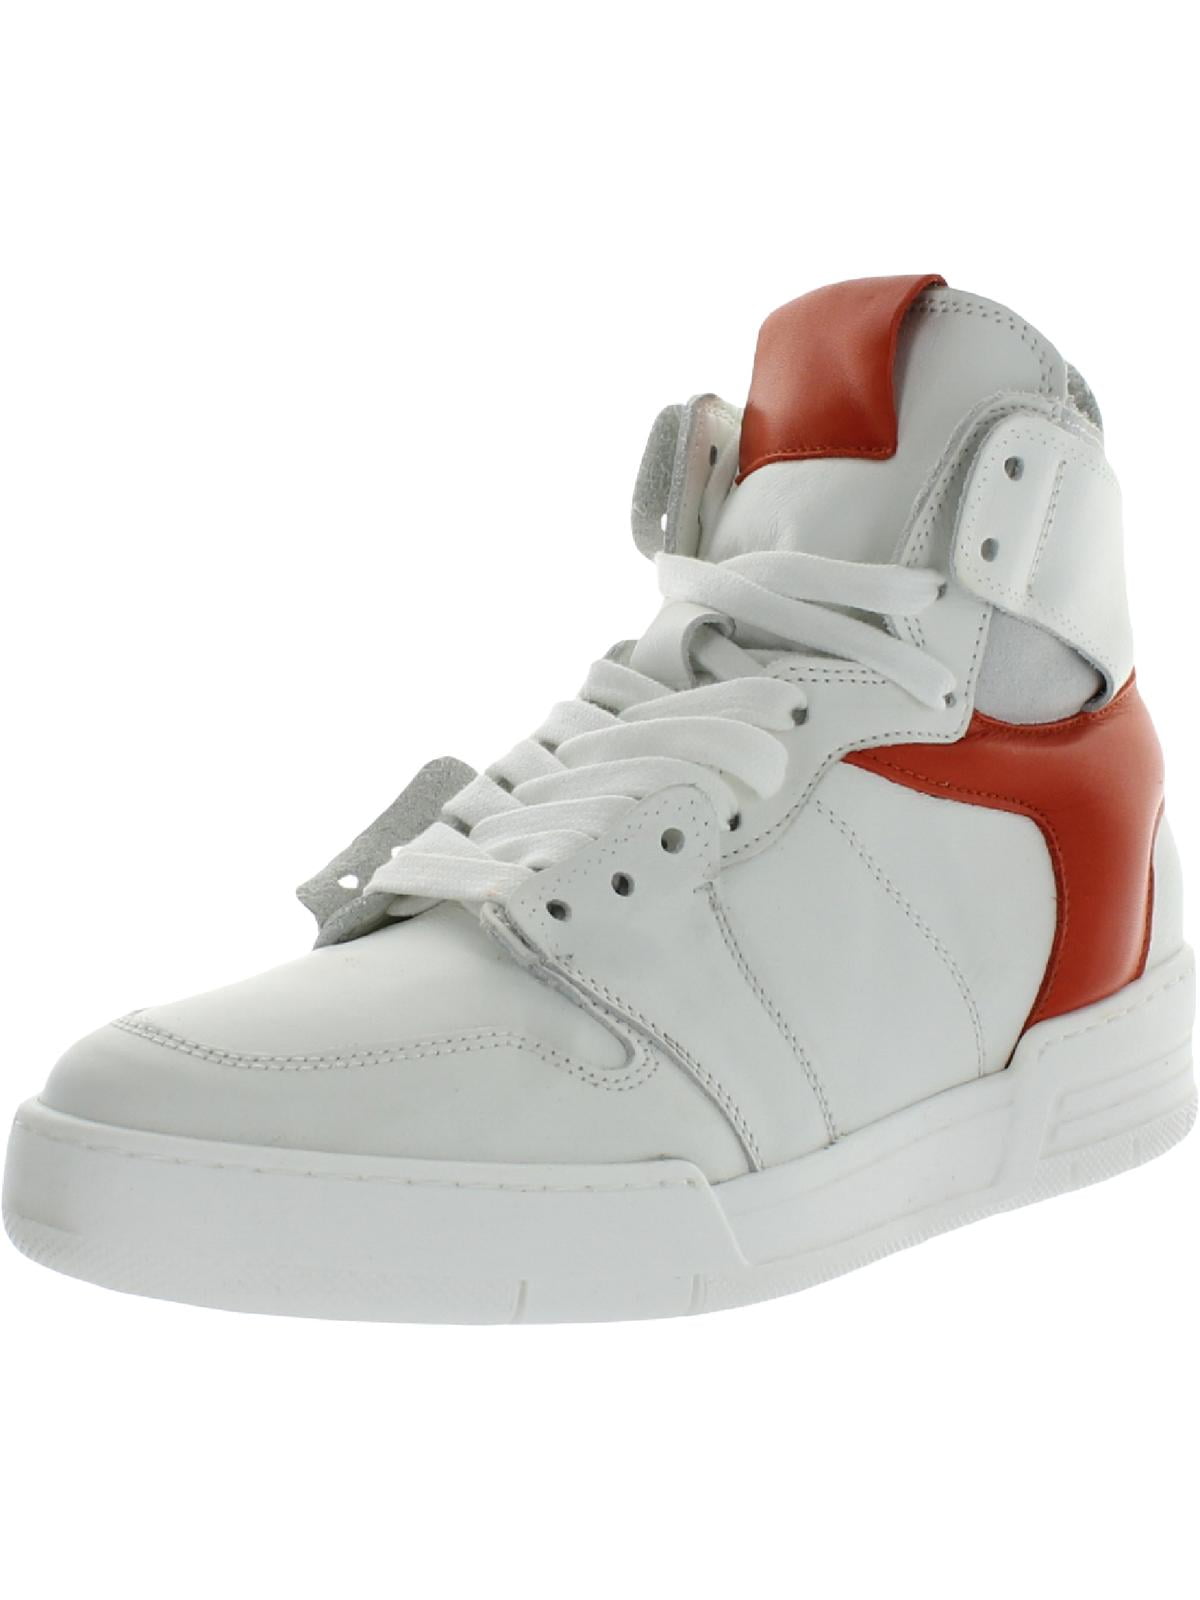 Steve Madden Womens Bizzy Leather High Top Athletic and Training Shoes ...